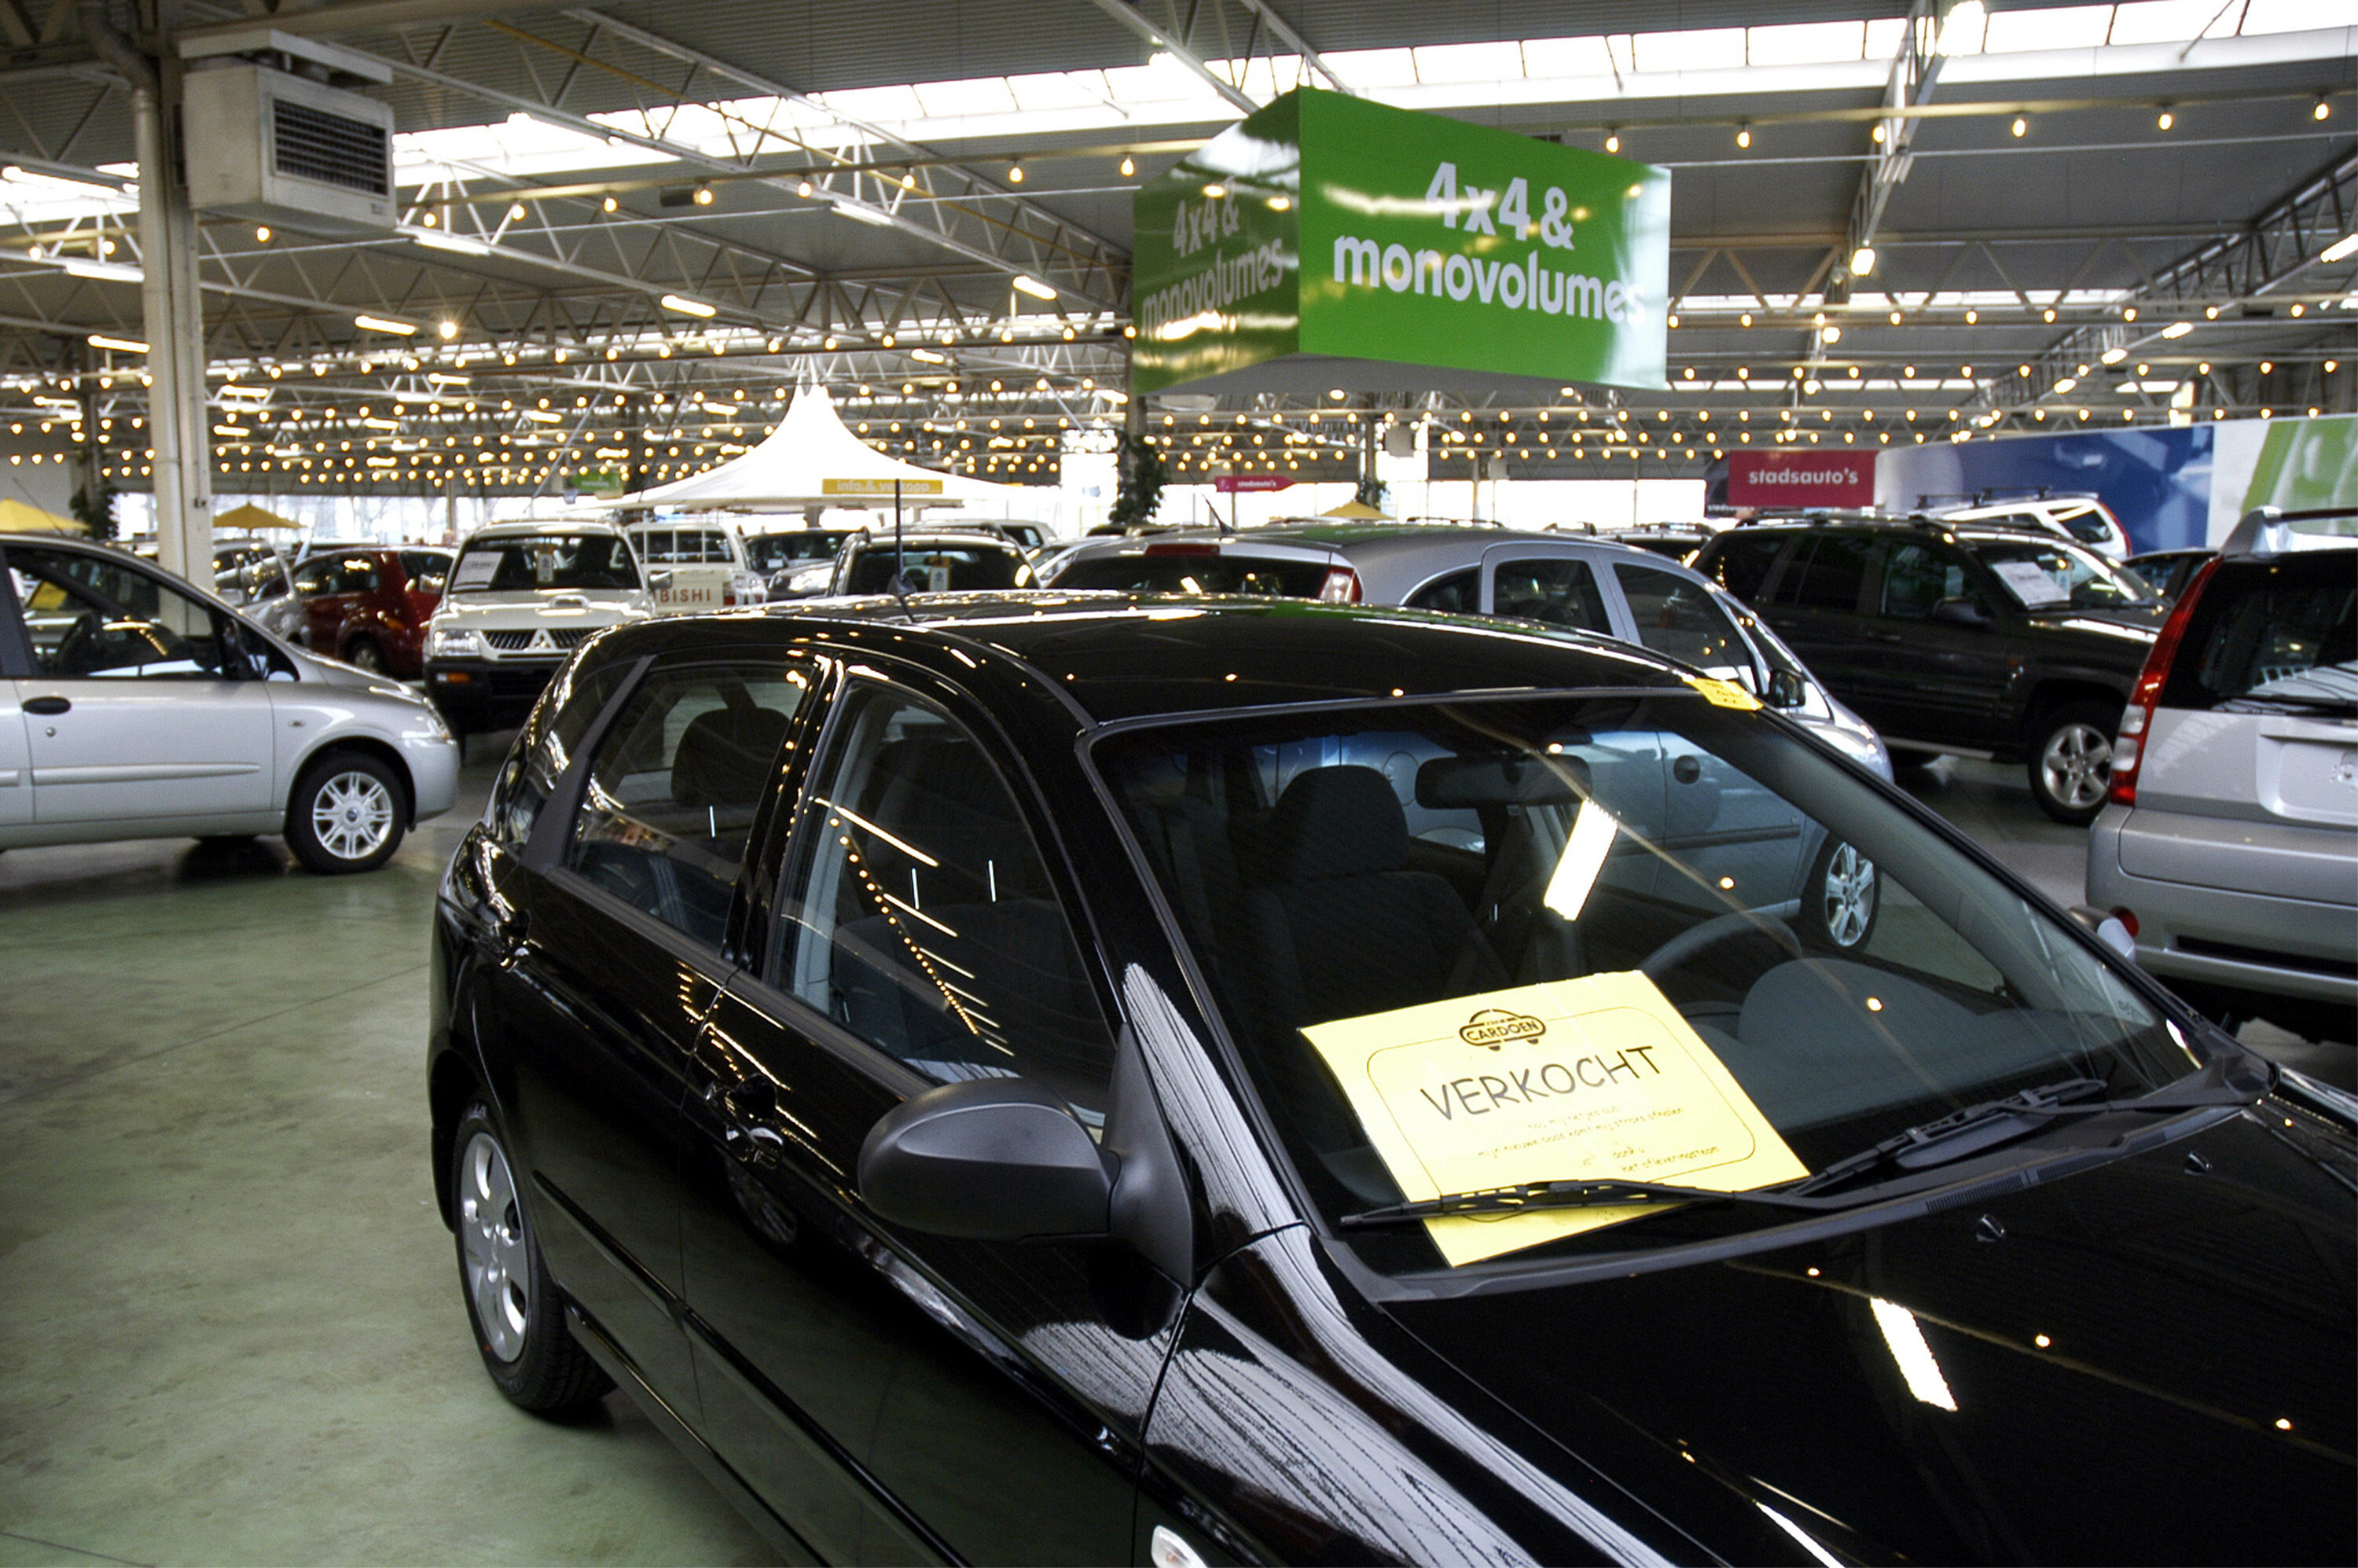 Post-lockdown second-hand car market is booming